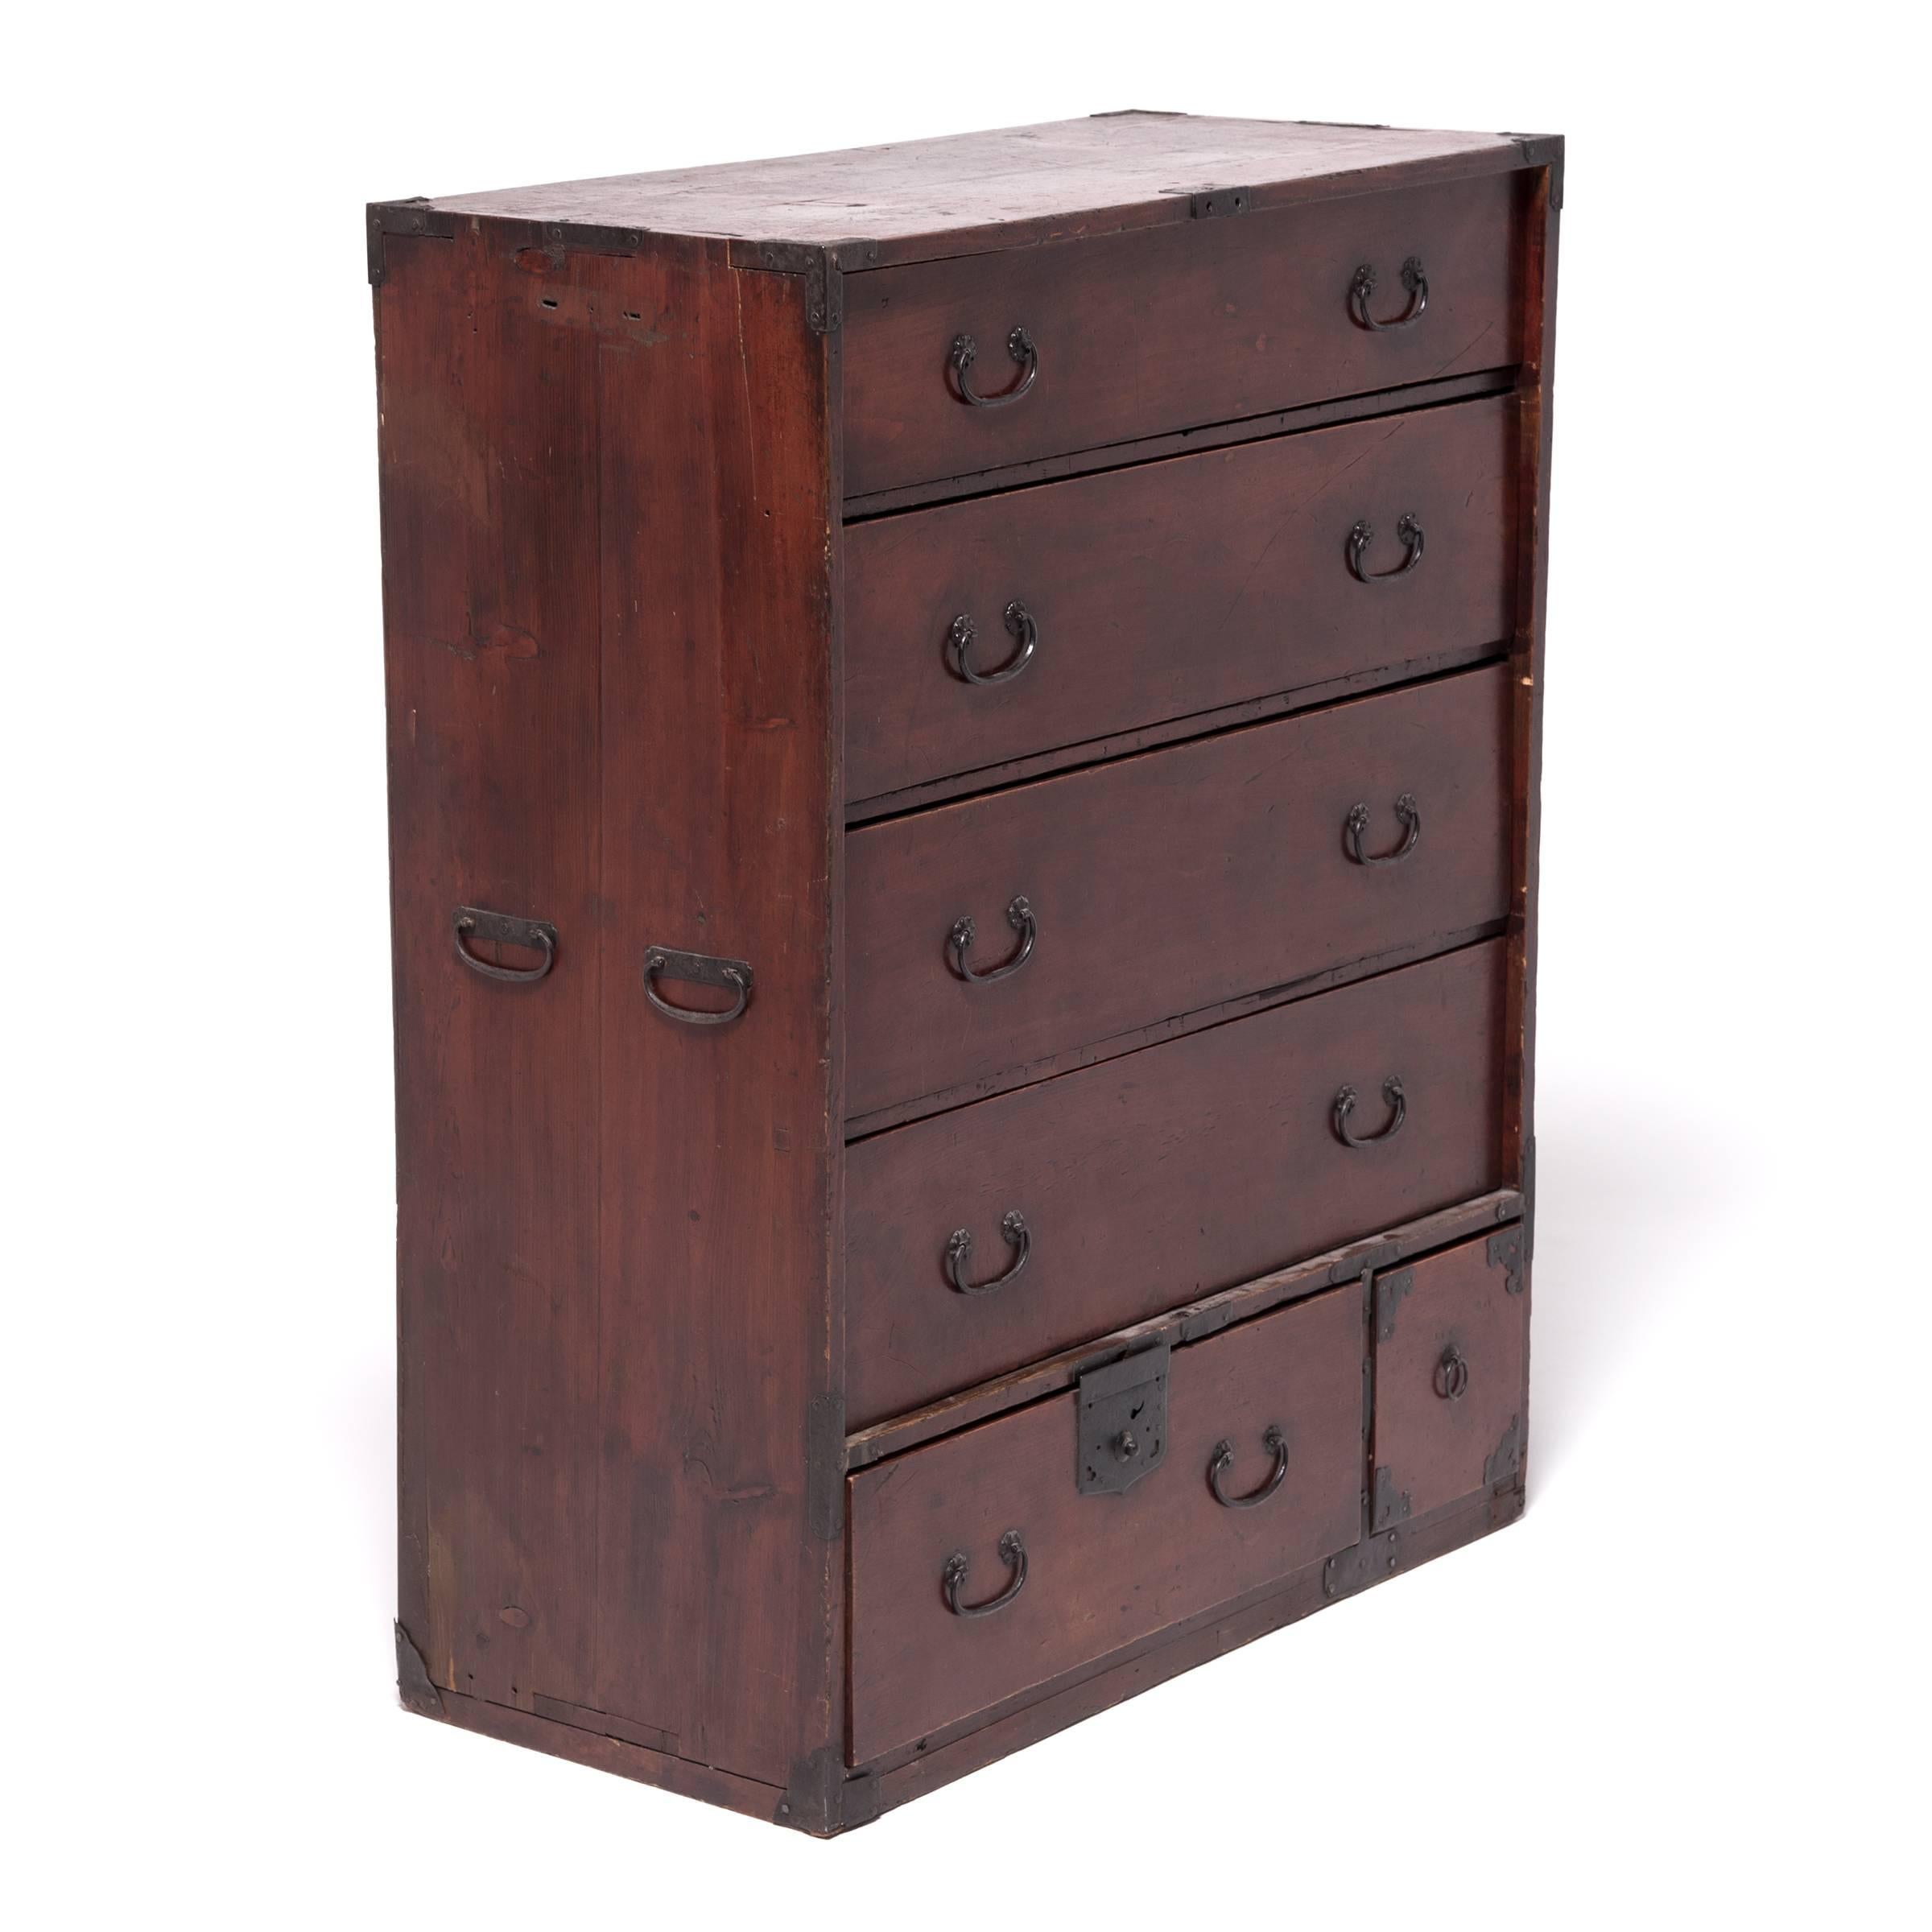 Traditionally designed to be portable and functional, Japanese tansu chests were versatile storage cabinets used for all kinds of purposes. This chest of drawers was originally used to store kimono. Made during Japan’s Mejii period (1868–1912),